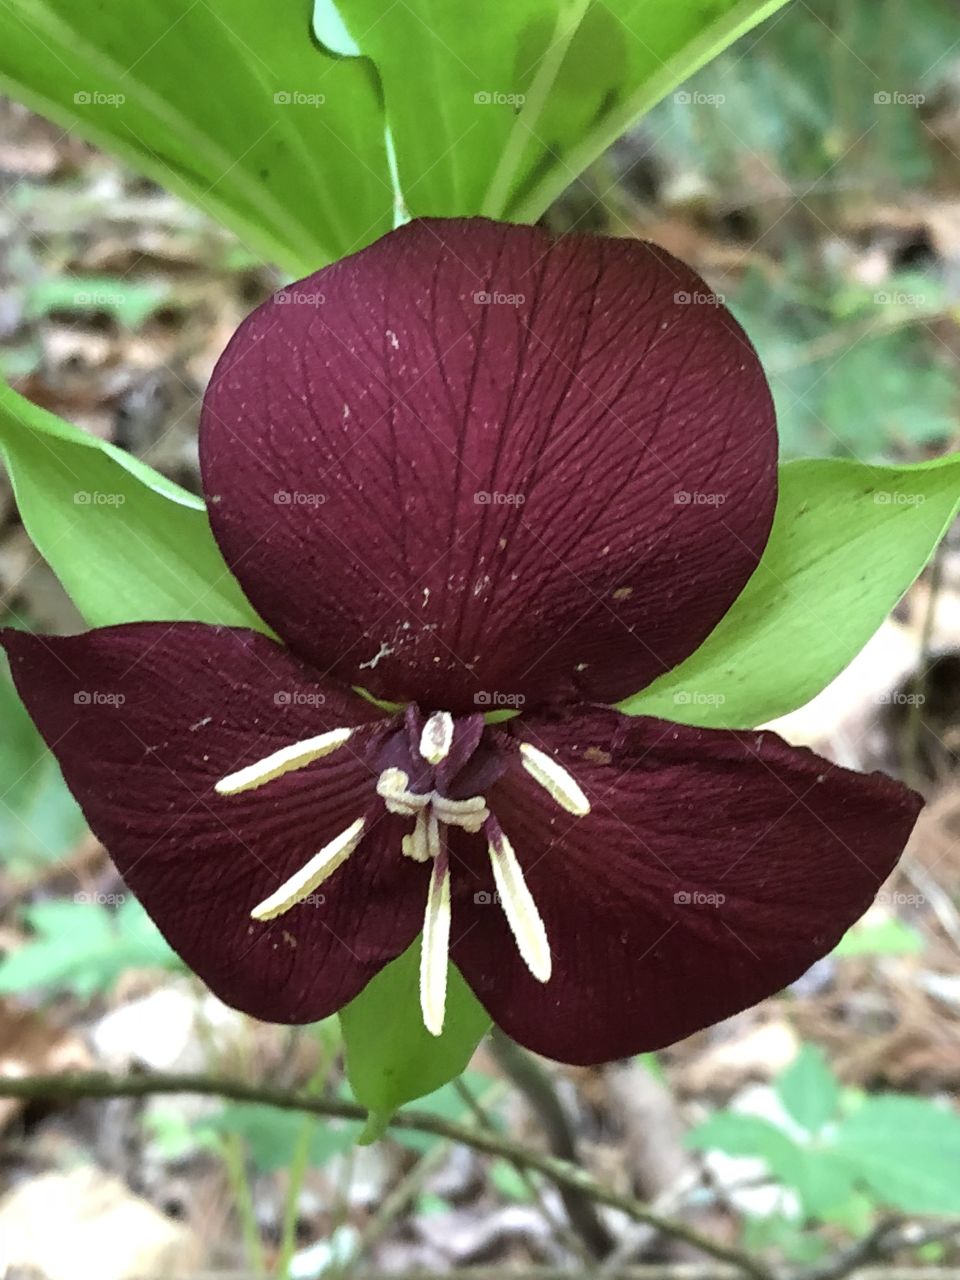 A trillium of a most unforgettable color hides underneath. To find the treasure, one only needs to look closely beneath the green growth of spring. 